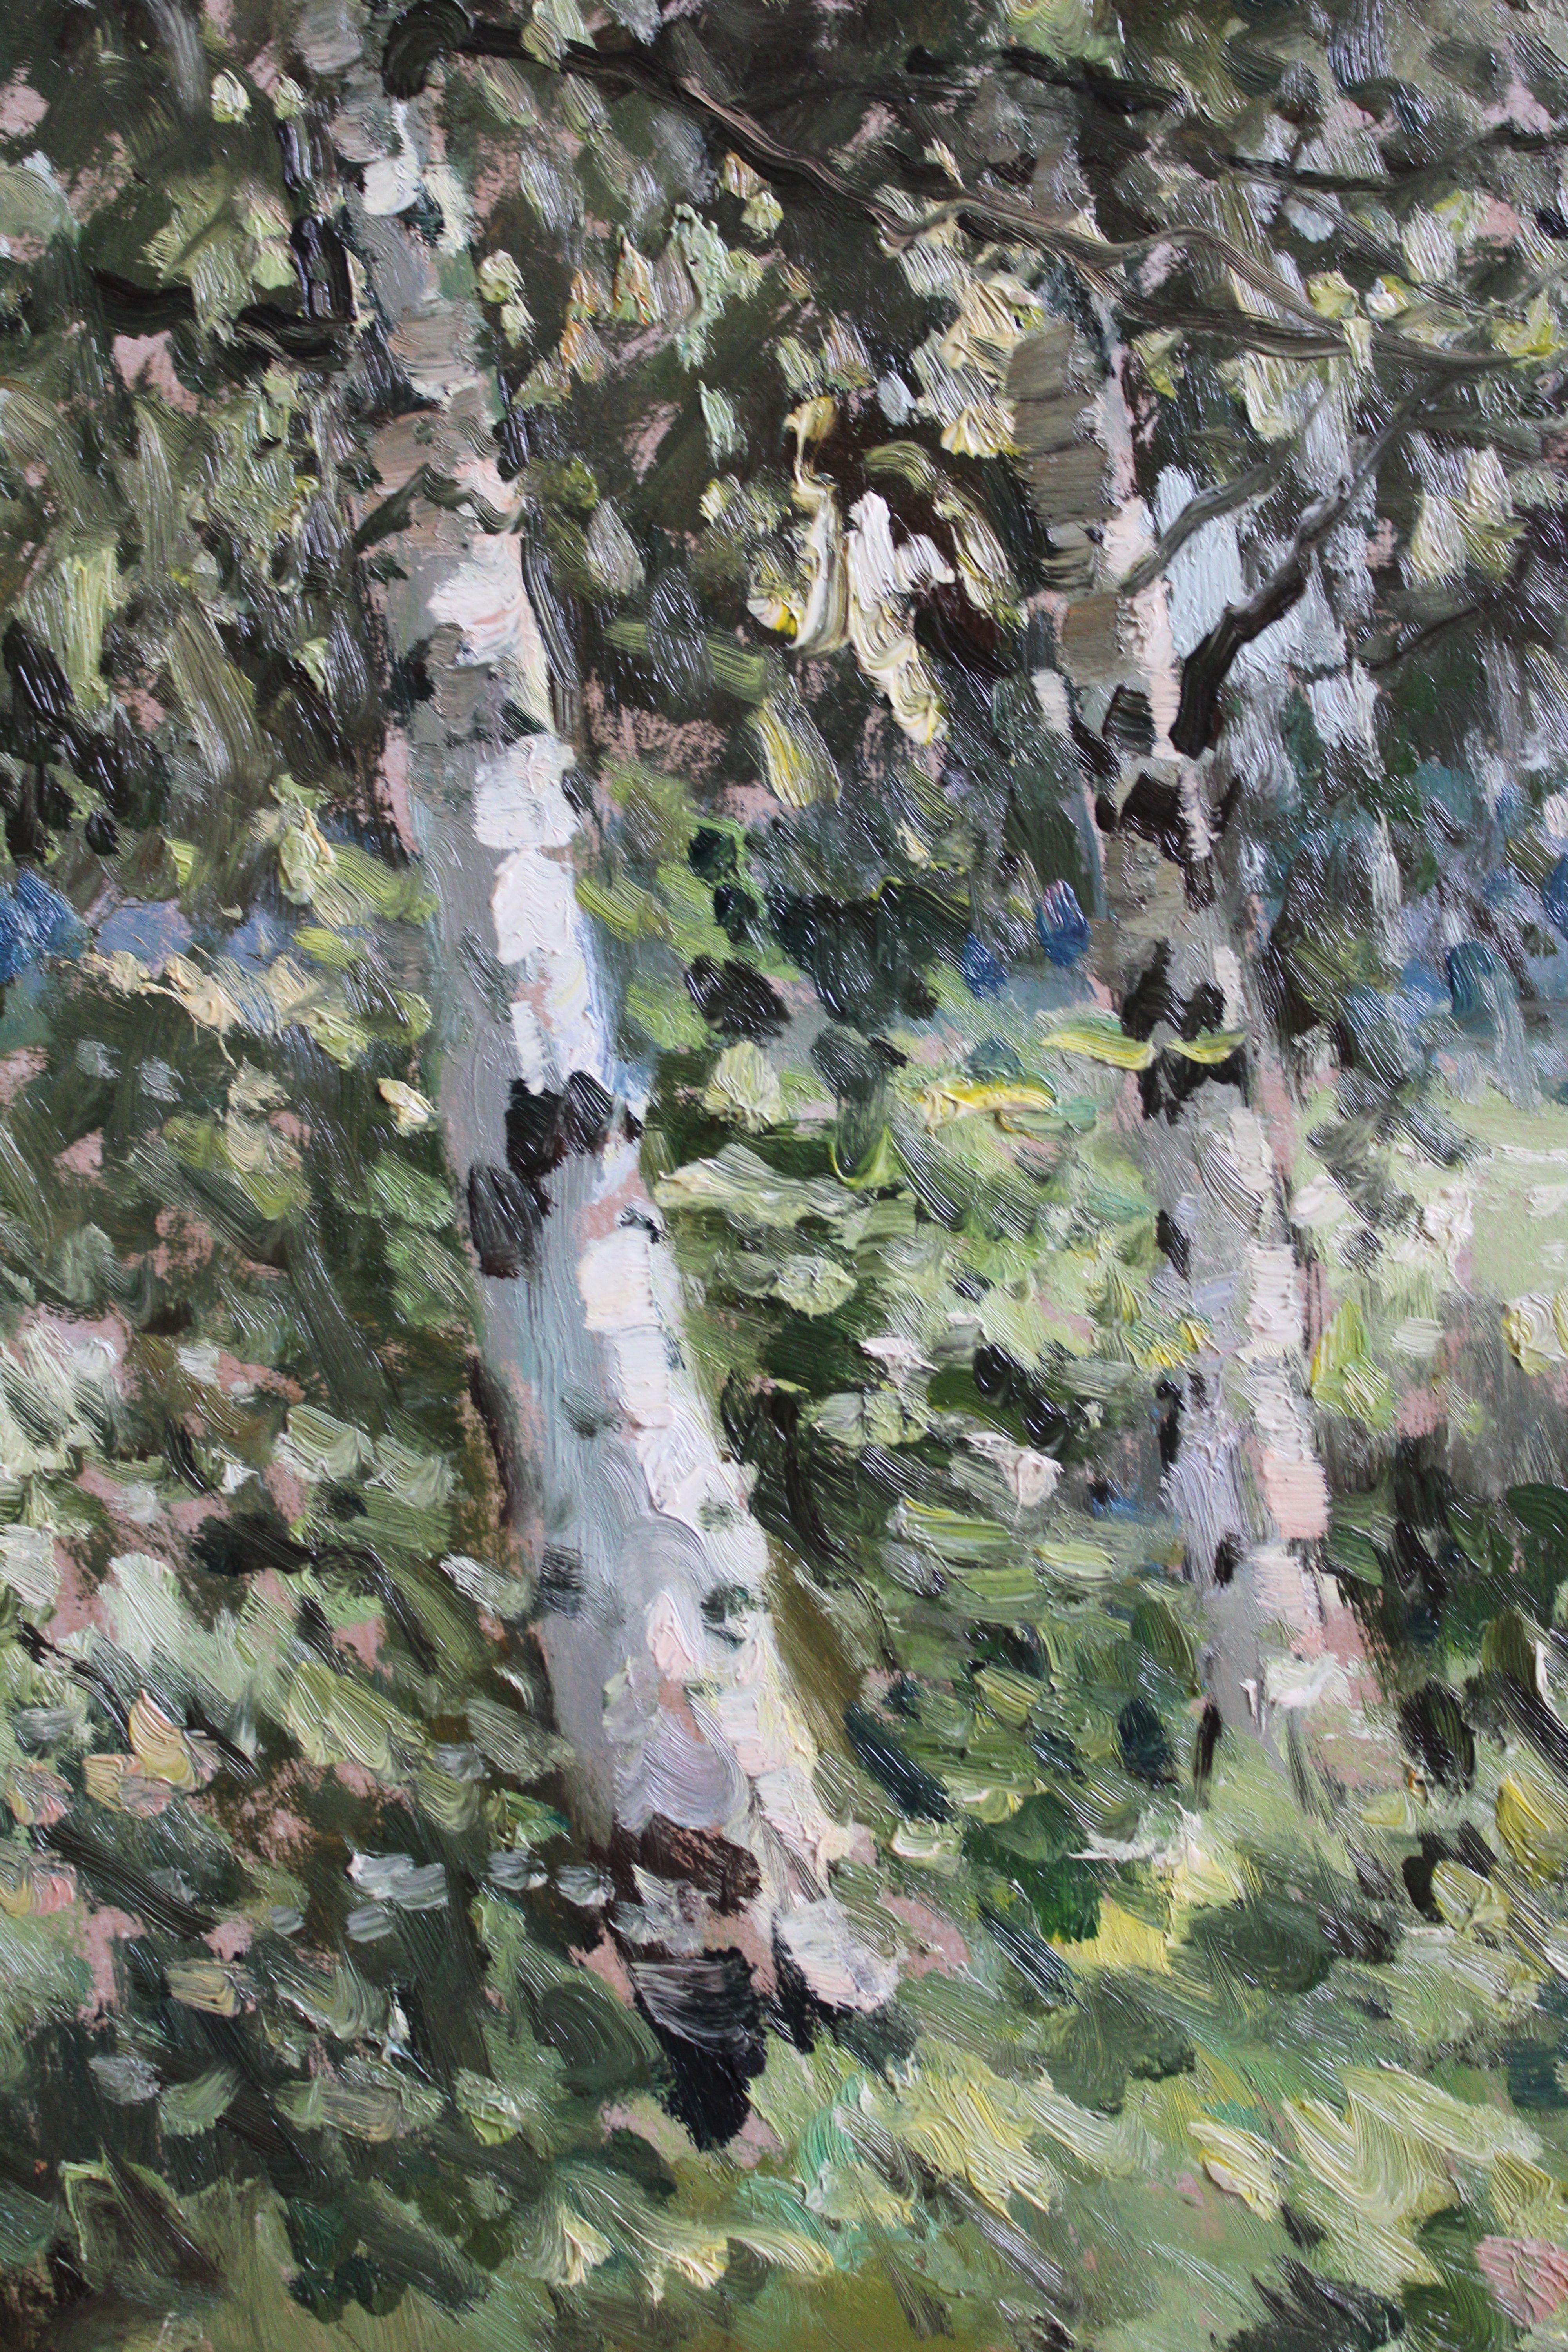 Spring birches. 1990. Cardboard, oil, 70x95 cm

Edgars Vinters (1919-2014)
Edgars Vinters is working in oil, watercolor and monotype techniques. He paints landscapes in different seasons and flowers. In 1970 the significant place in his creativity